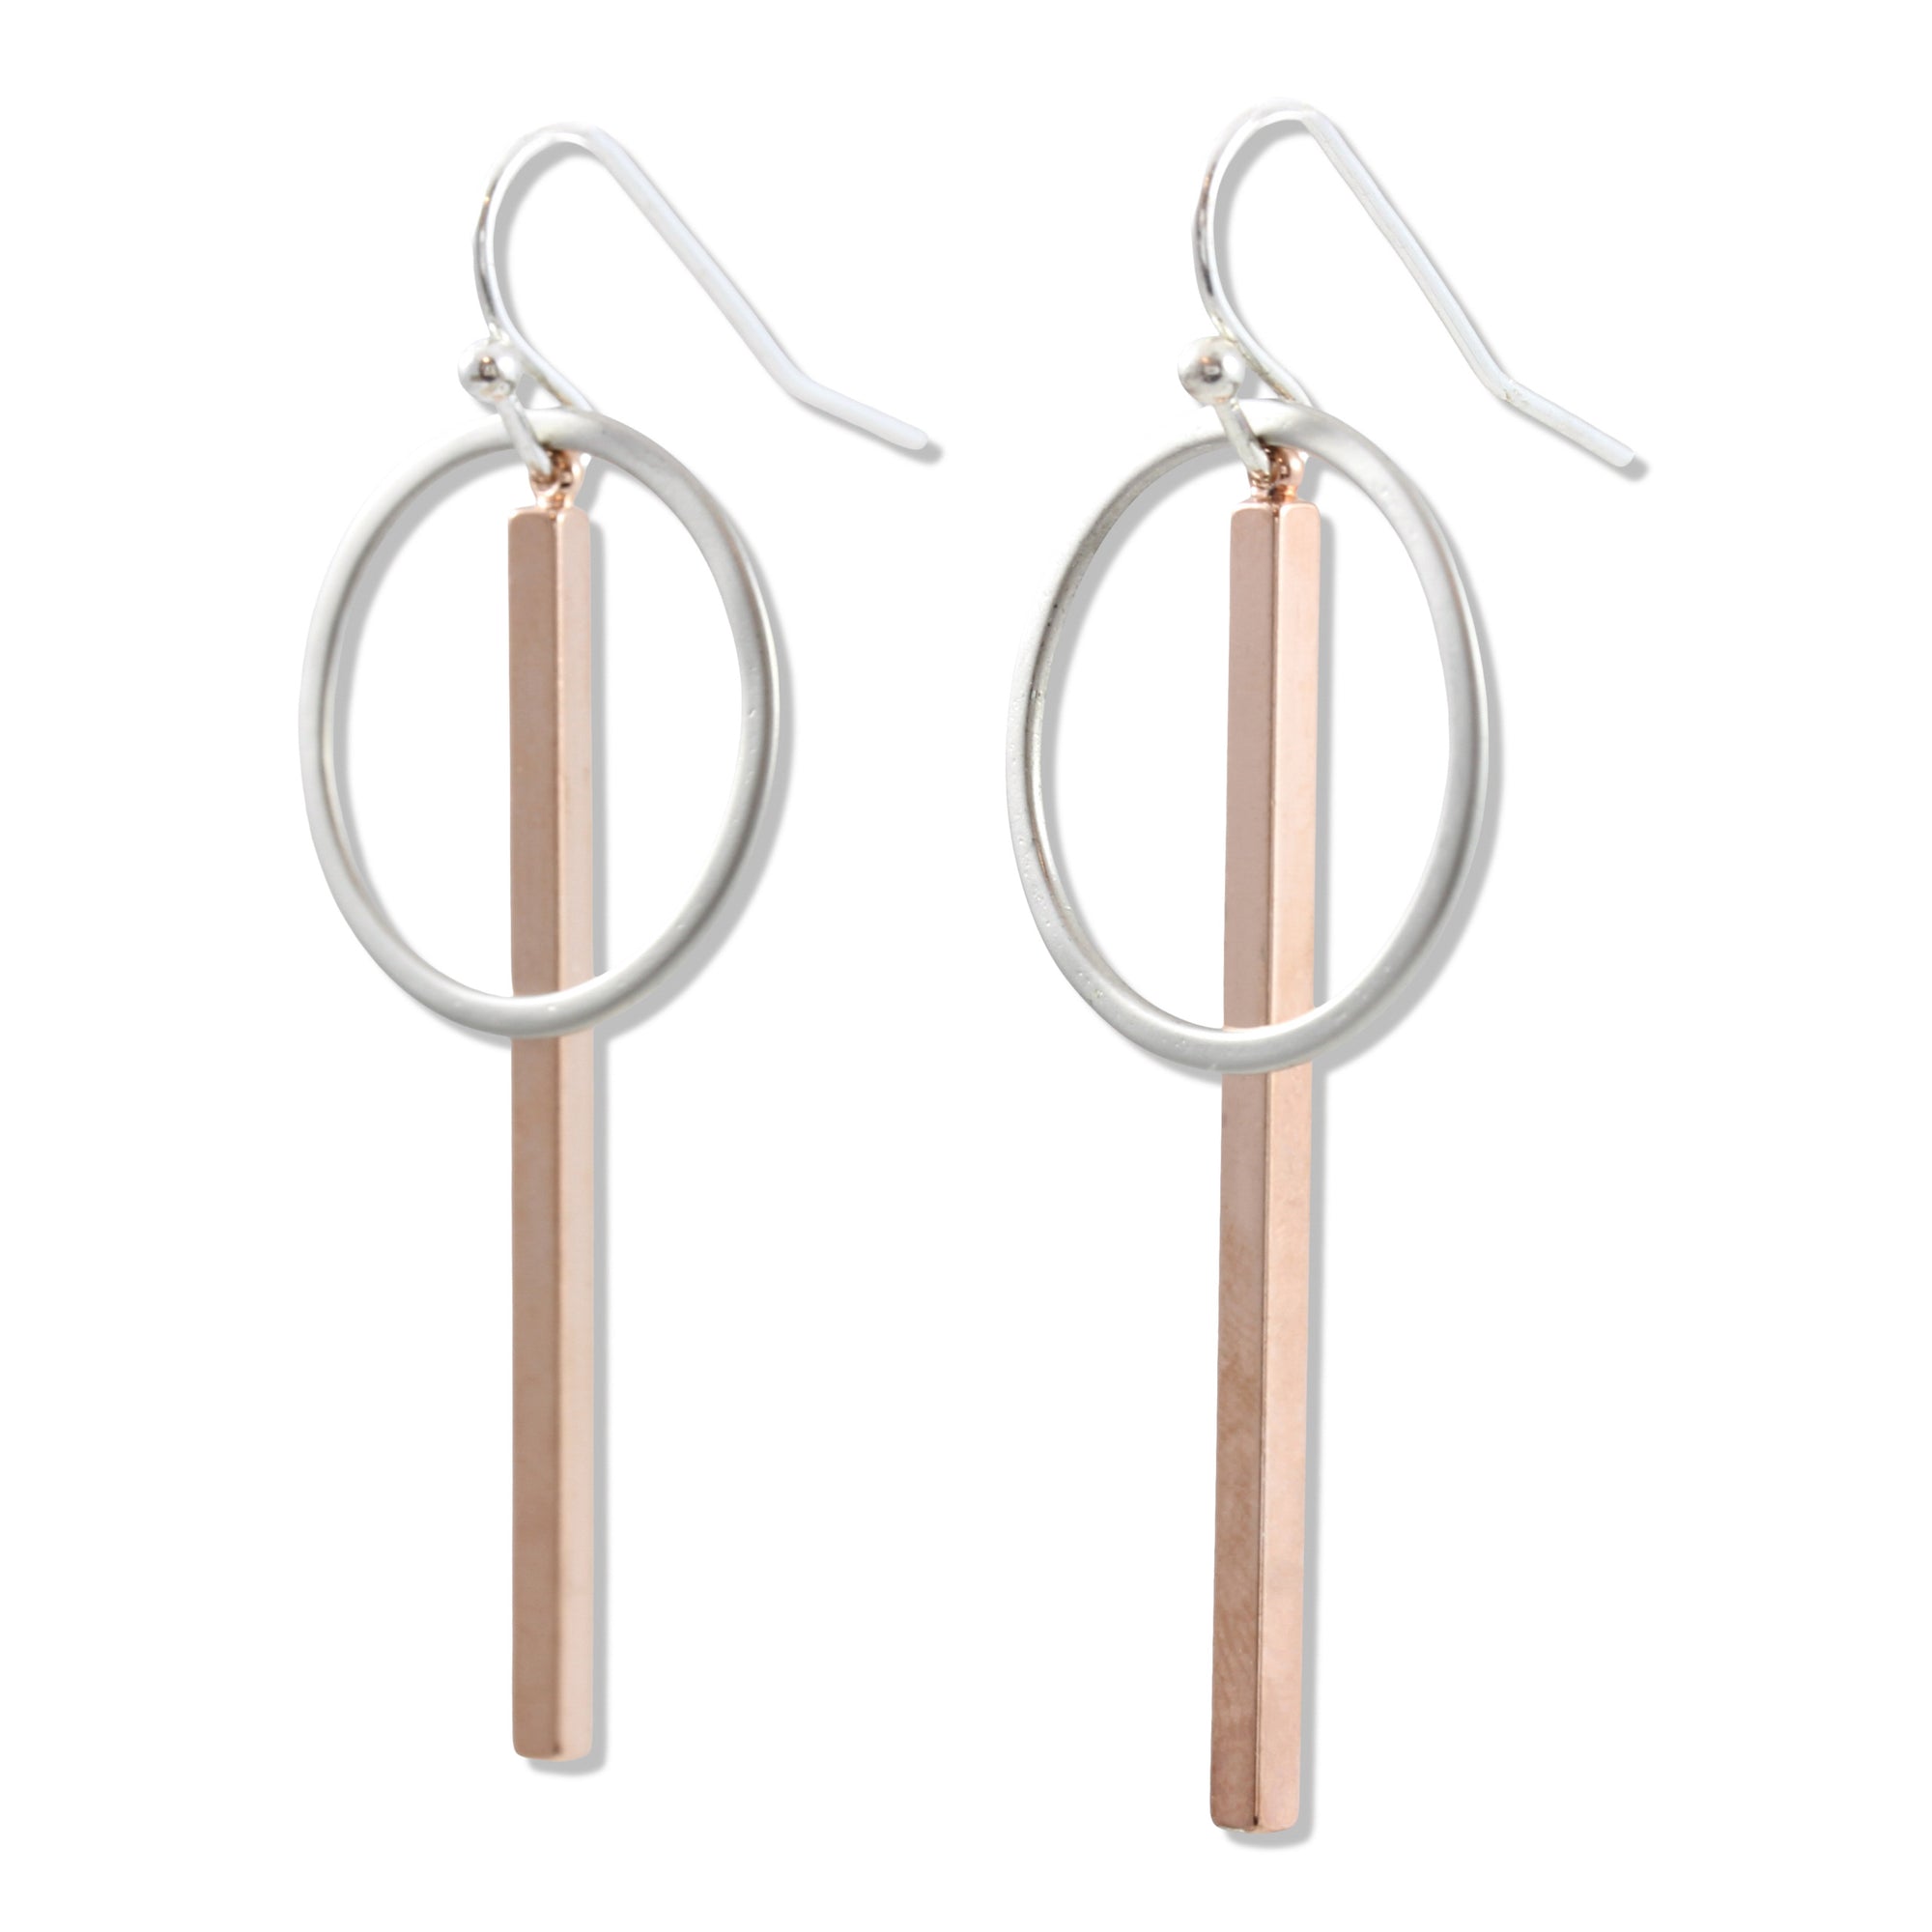 "Le Contour" Mixed Metal Matte Silver and Rose Gold Bar Drop Earrings